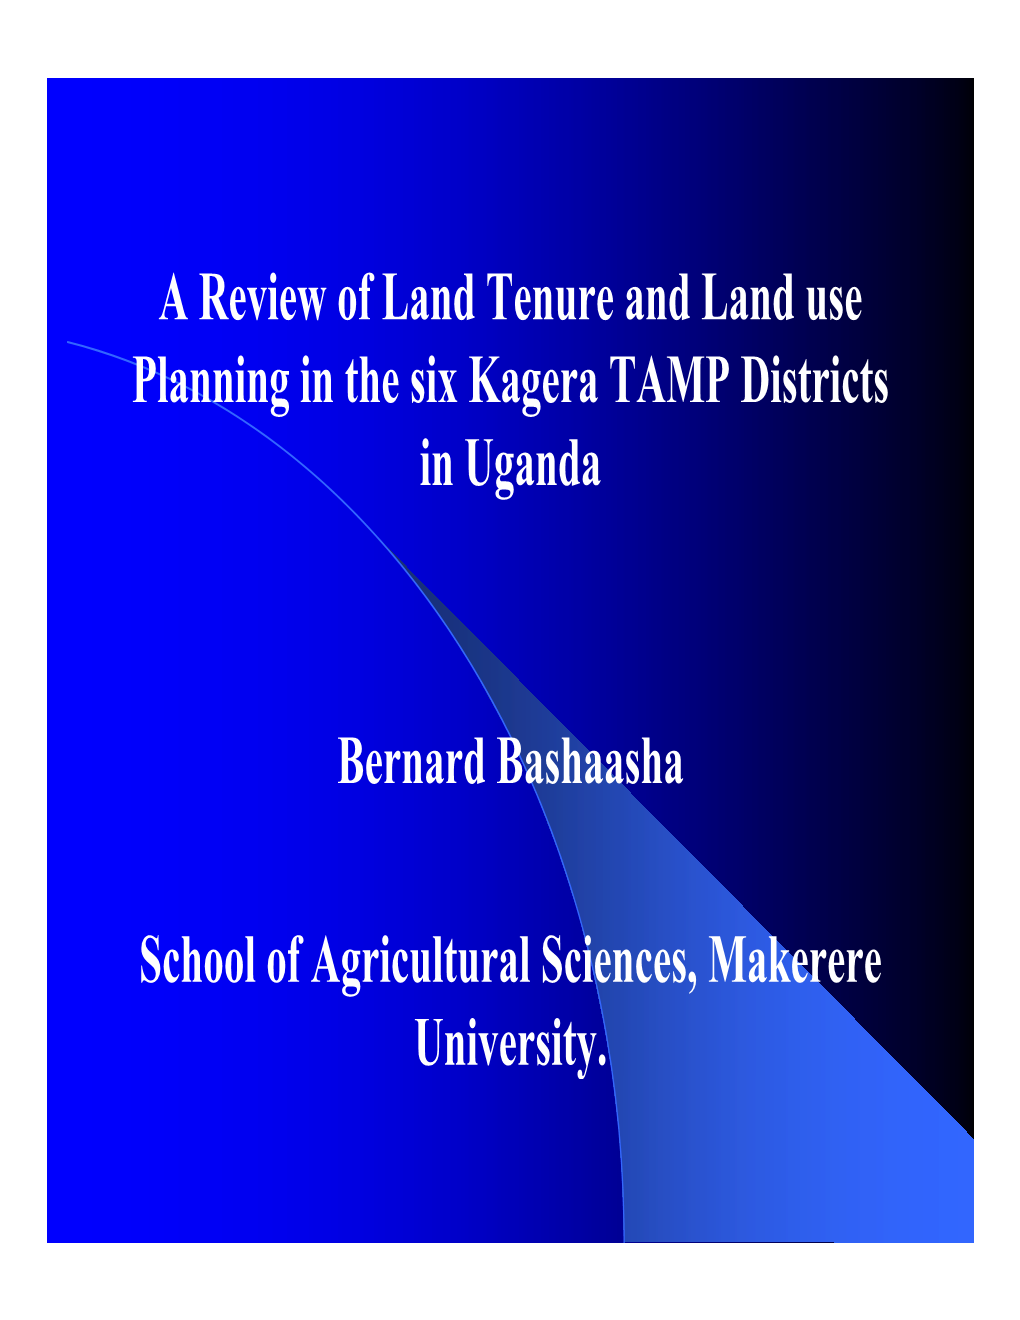 A Review of Land Tenure and Land Use Planning in the Six Kagera TAMP Districts in Uganda